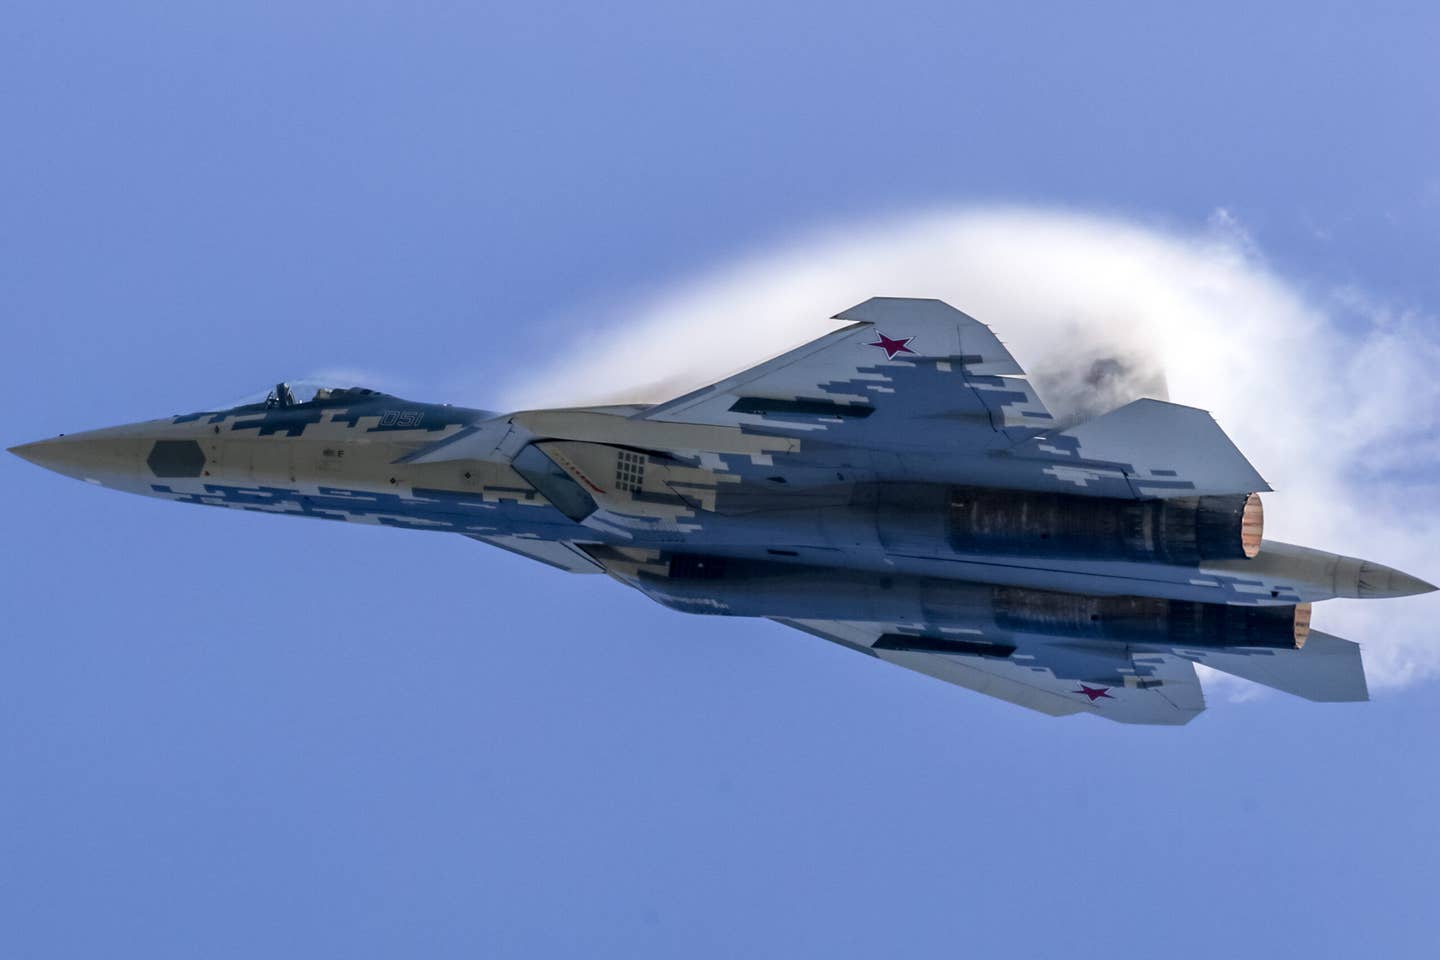 A Su-57 performs a flying display at the 2019 MAKS Moscow International Airshow near Zhukovsky, southeast of Moscow. The LEVCONs can be seen angled sharply downward. <em>Photo by Leonid Faerberg/SOPA Images/LightRocket via Getty Images</em>